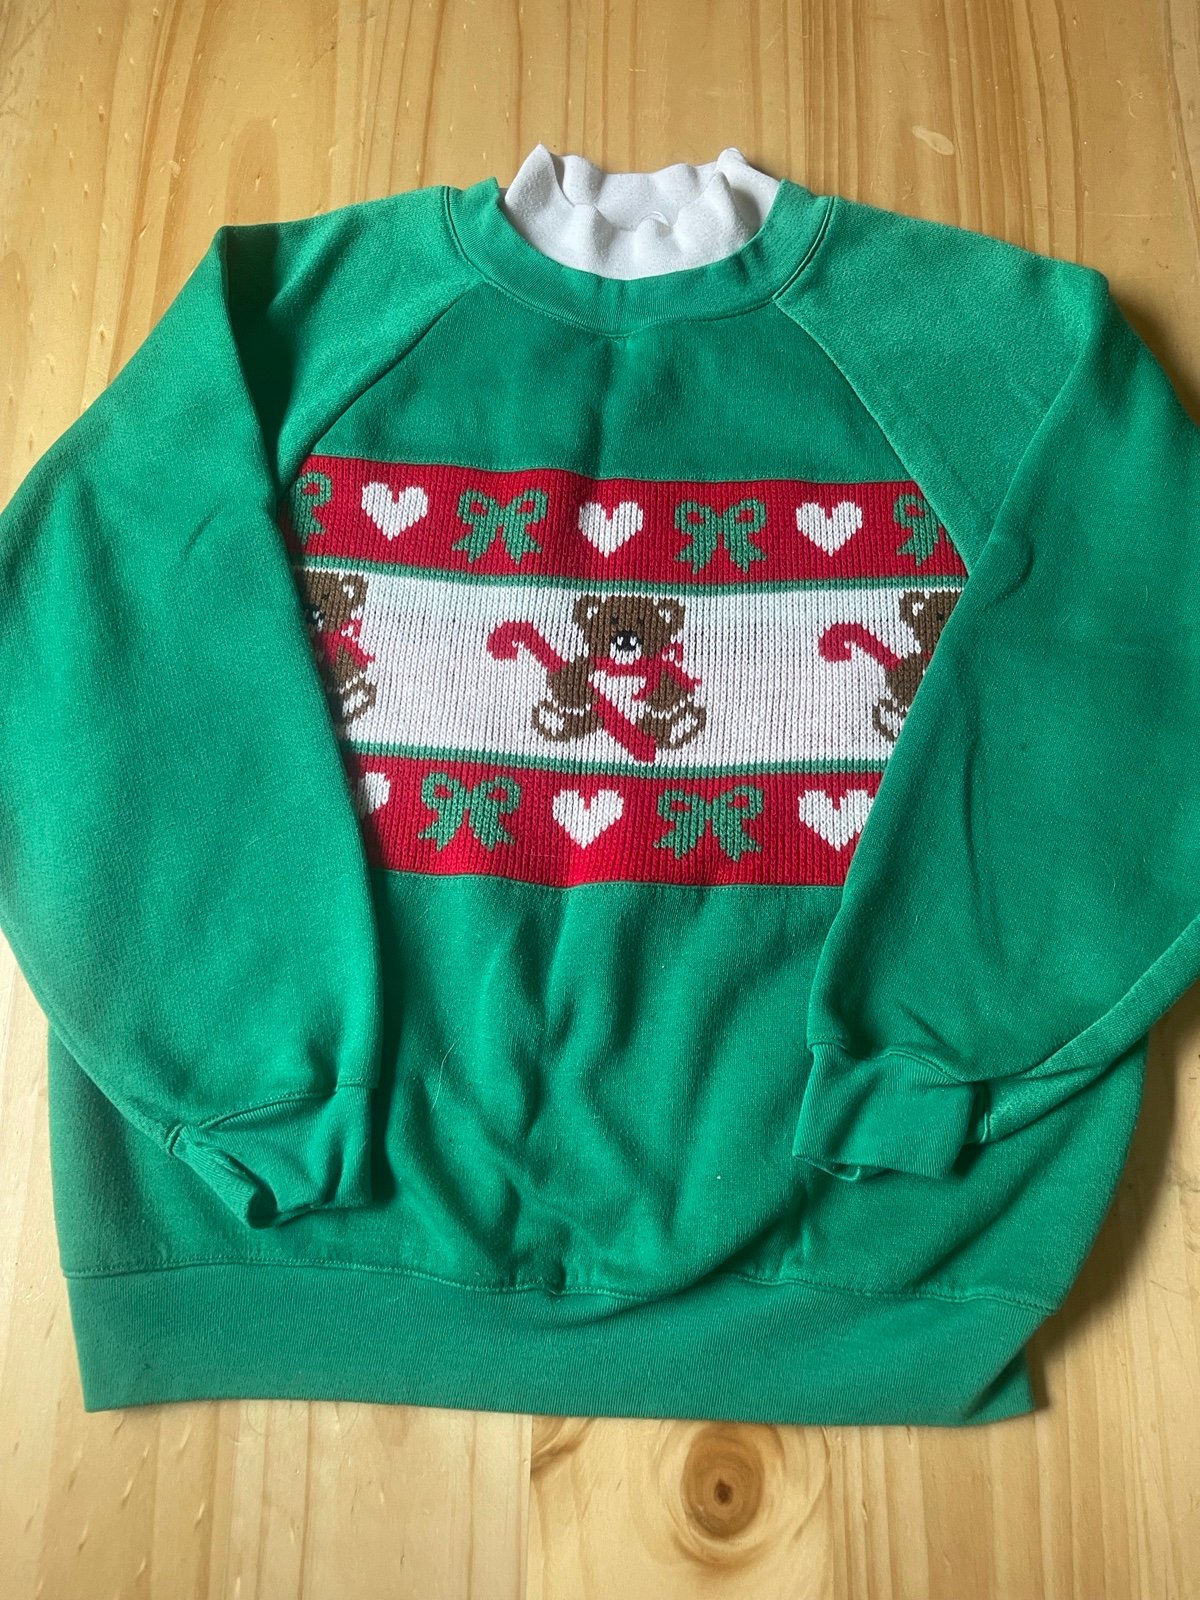 good price Vintage Best Bets Christmas Sweater hZlCAoE0